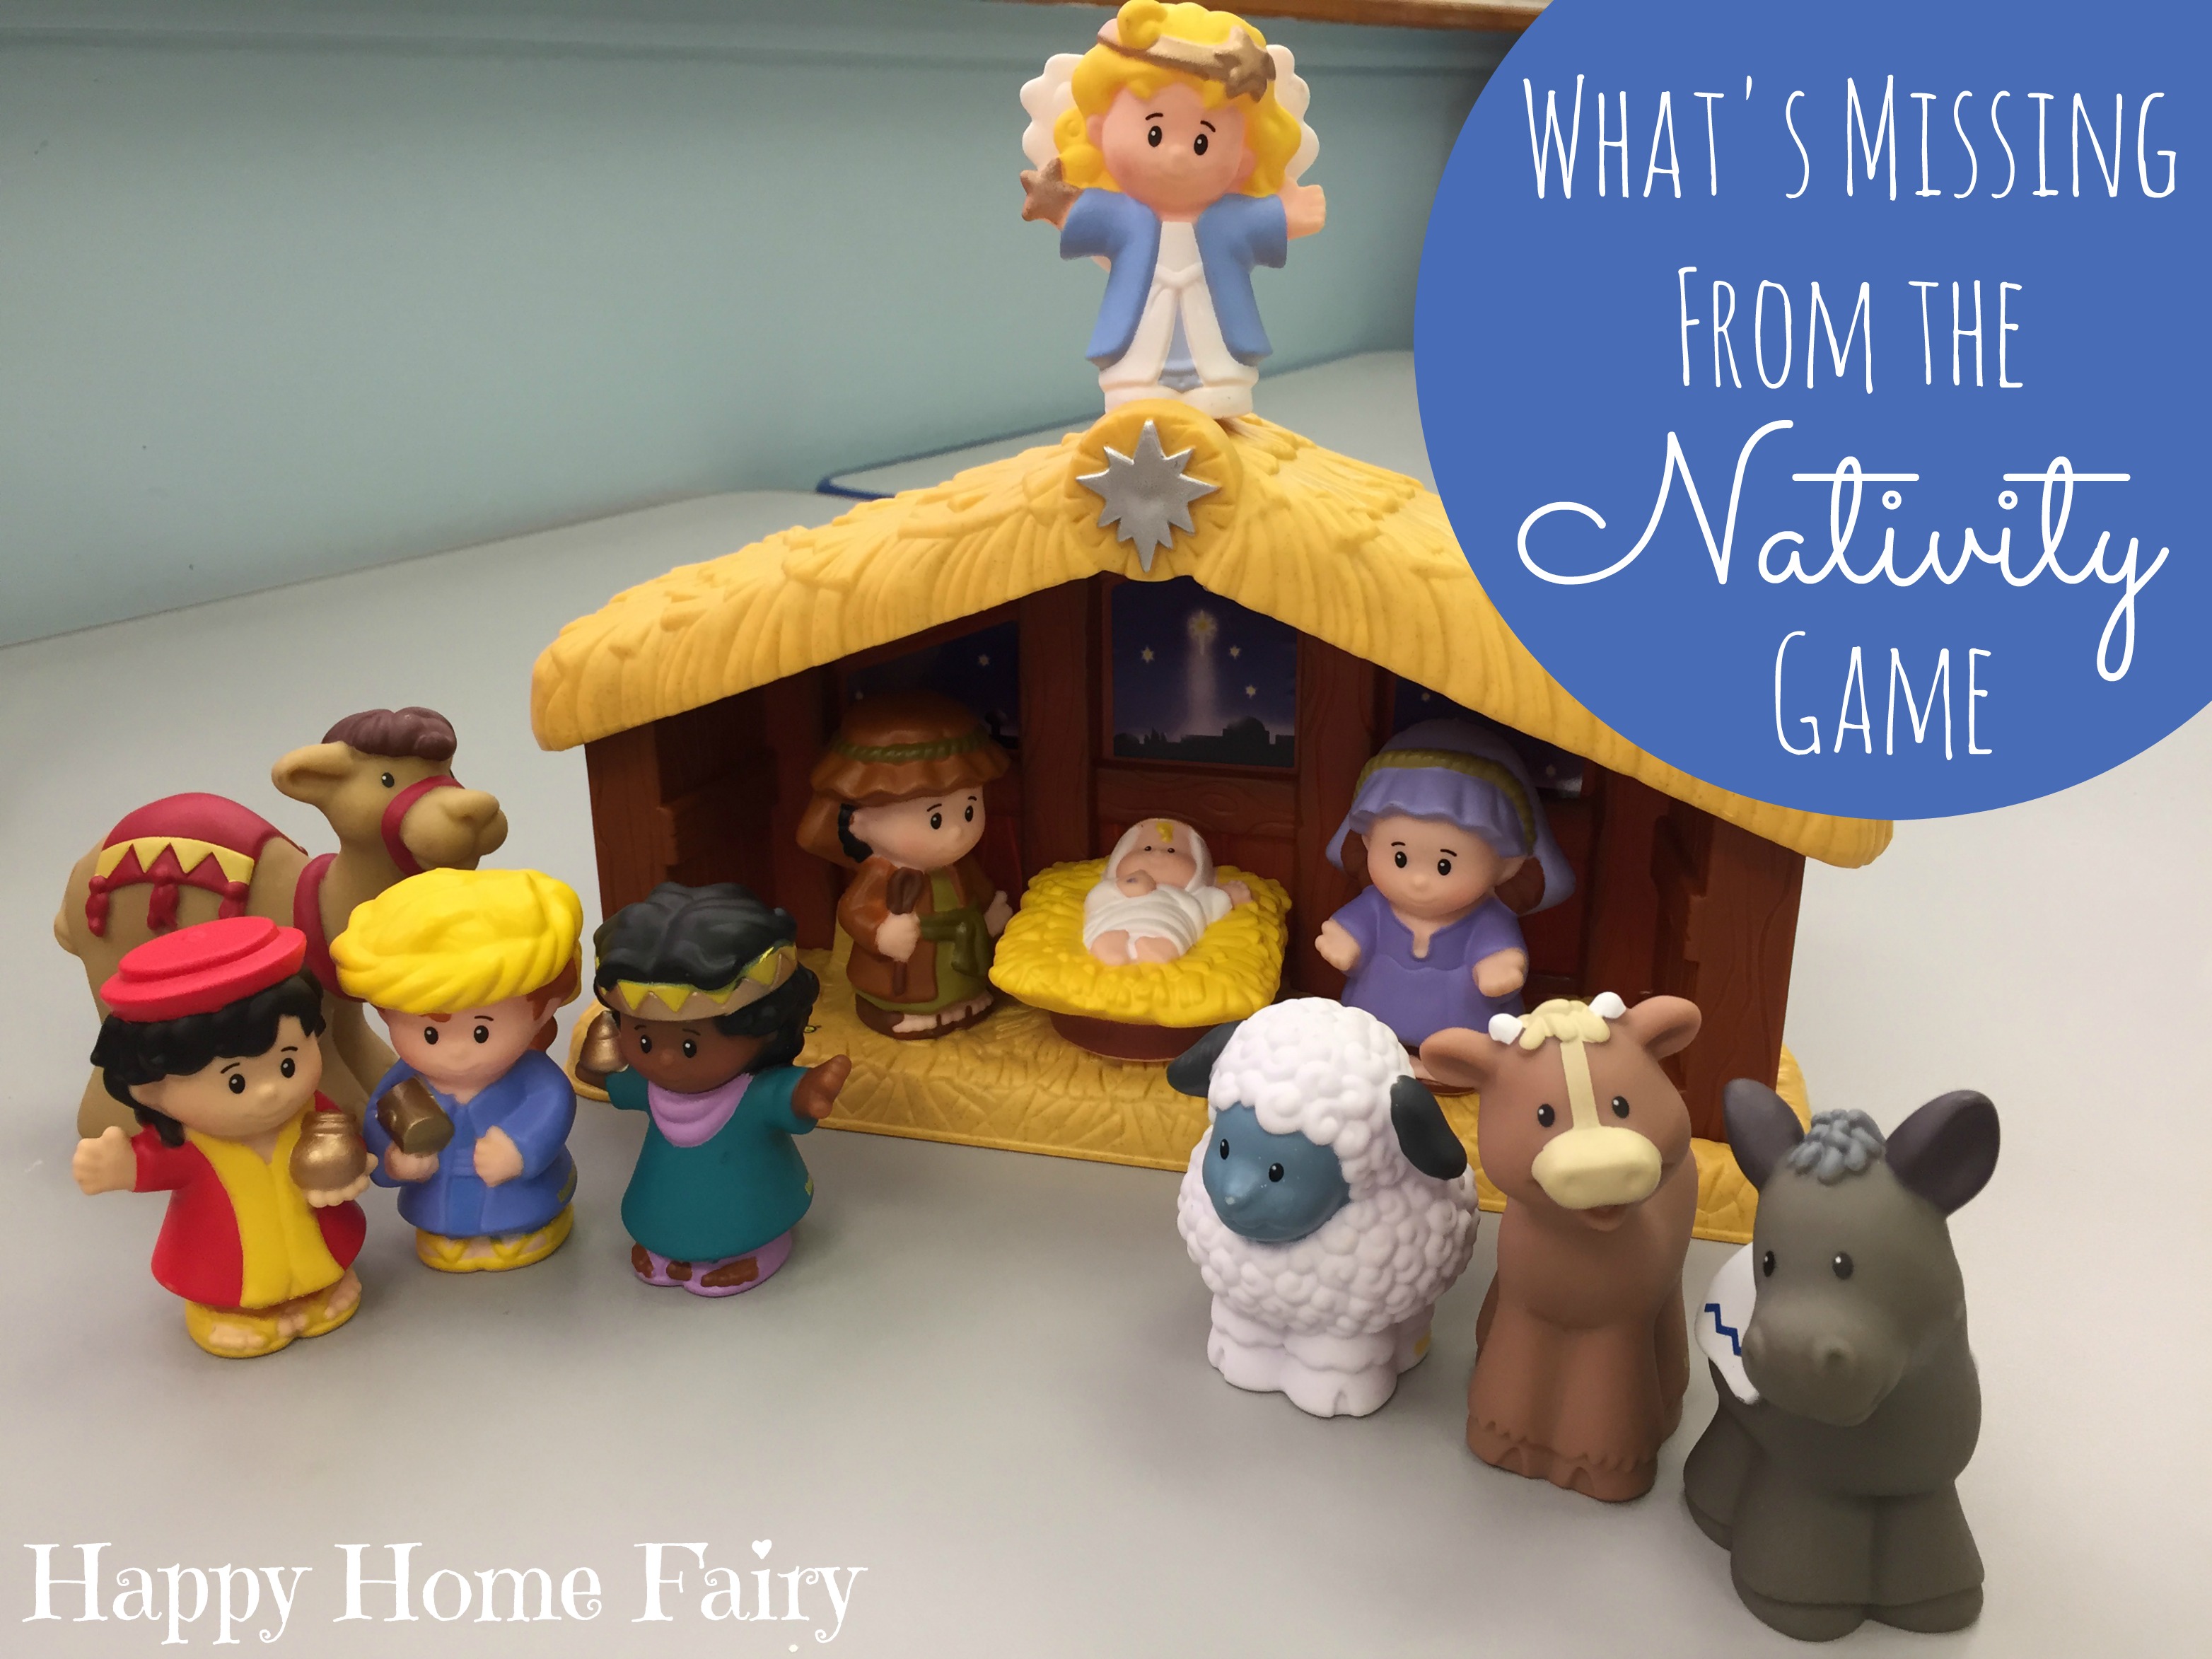 What's Missing From the Nativity? Game - Happy Home Fairy